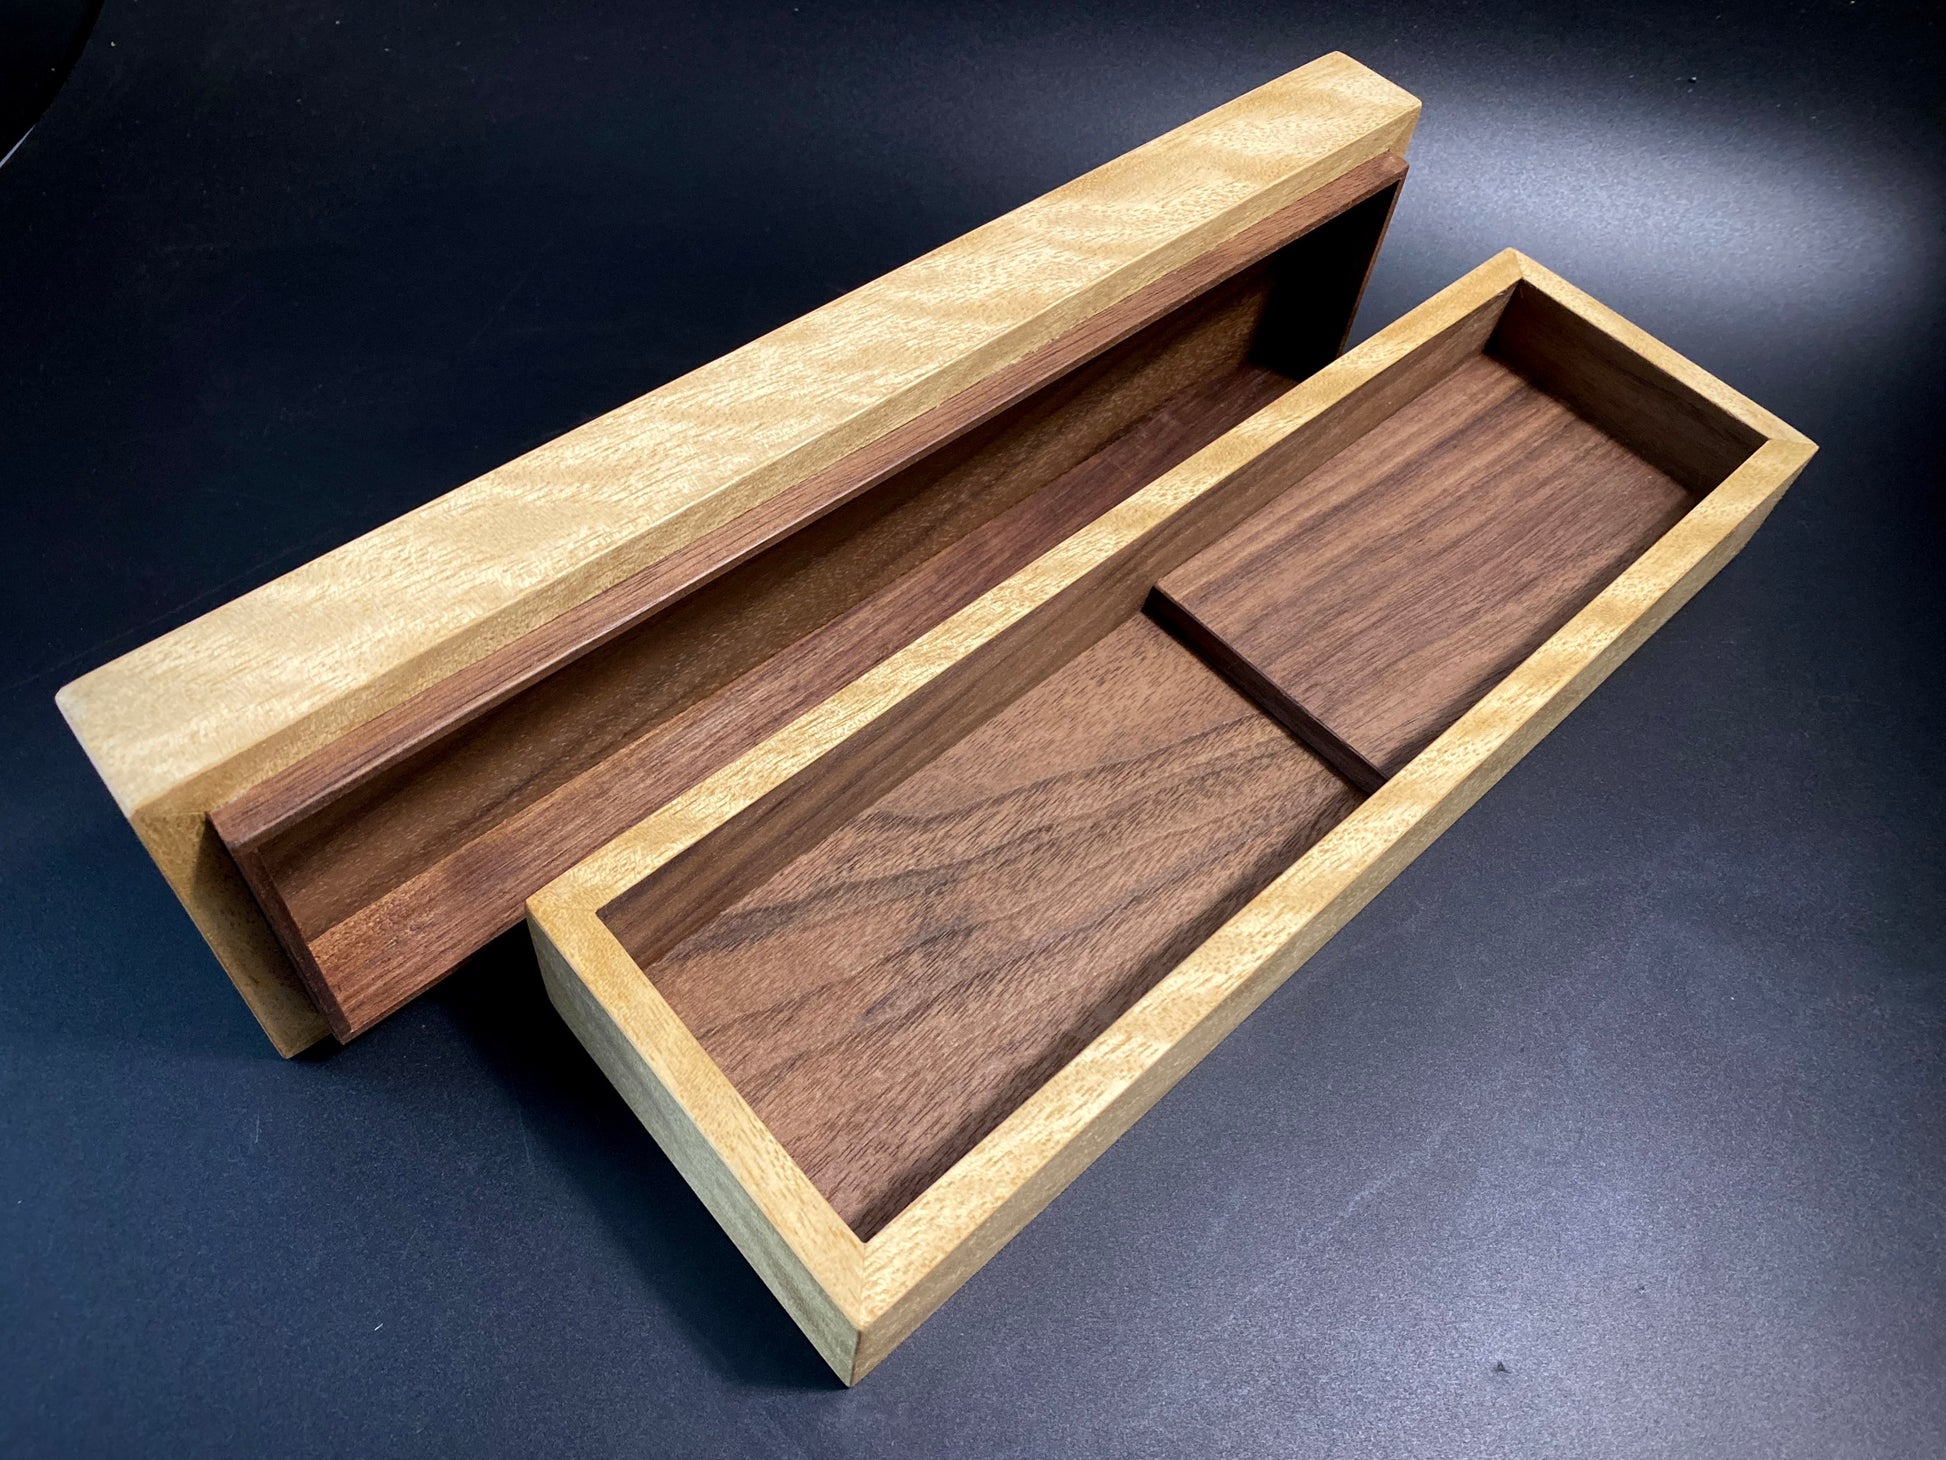 Box 256 mm. for premium knife packing, made of precious woods. #BOX_03